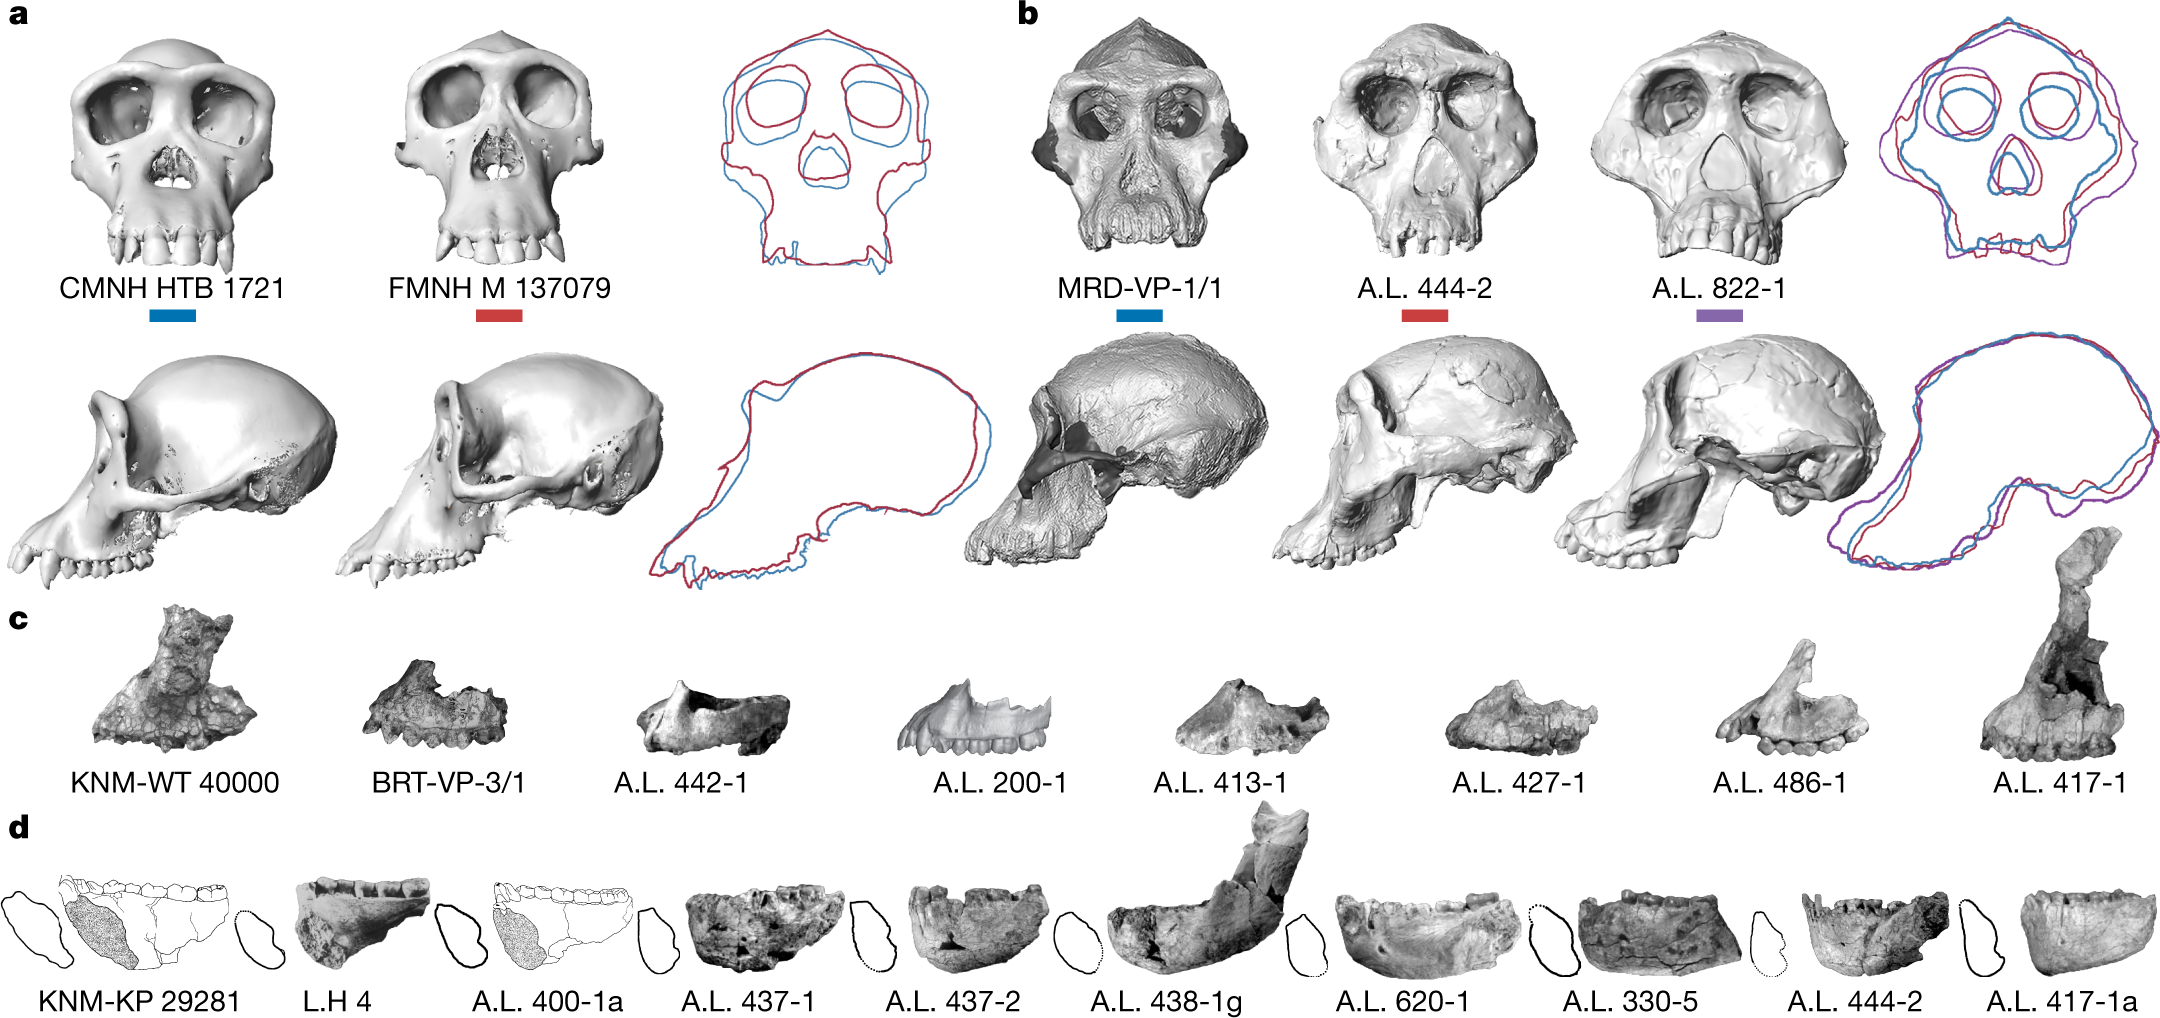 Reappraising the palaeobiology of Australopithecus | Nature